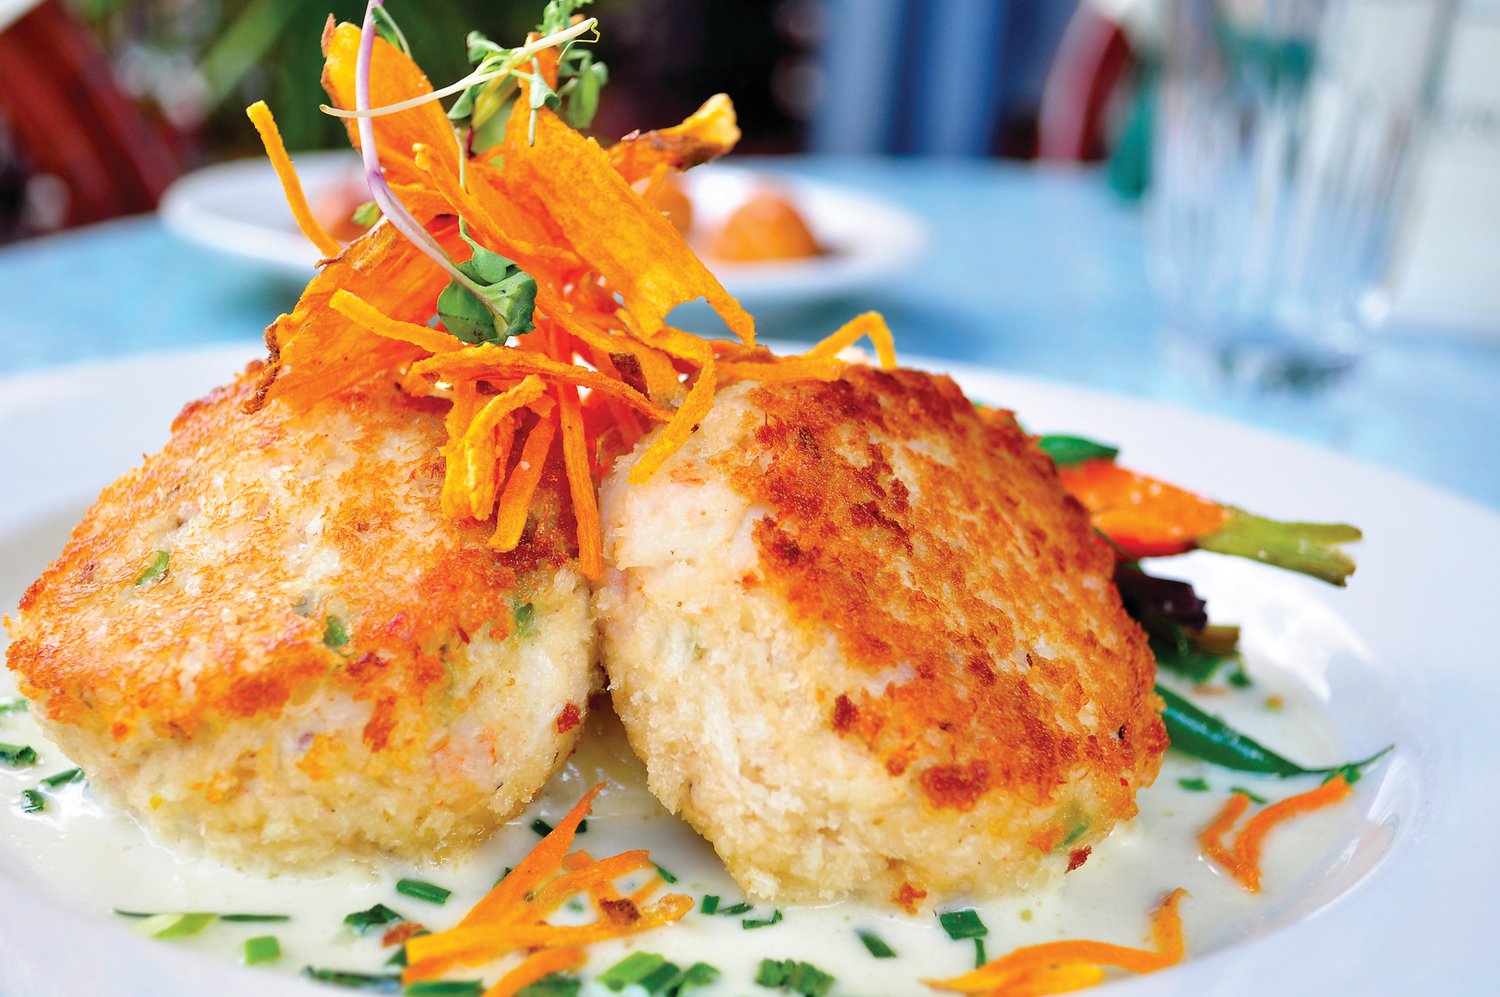 Crab cakes are a featured item on the Washington House menu in Sellersville. Restaurants are offering a wide range of dishes including vegetarian options. Photograph by Visit Bucks County.